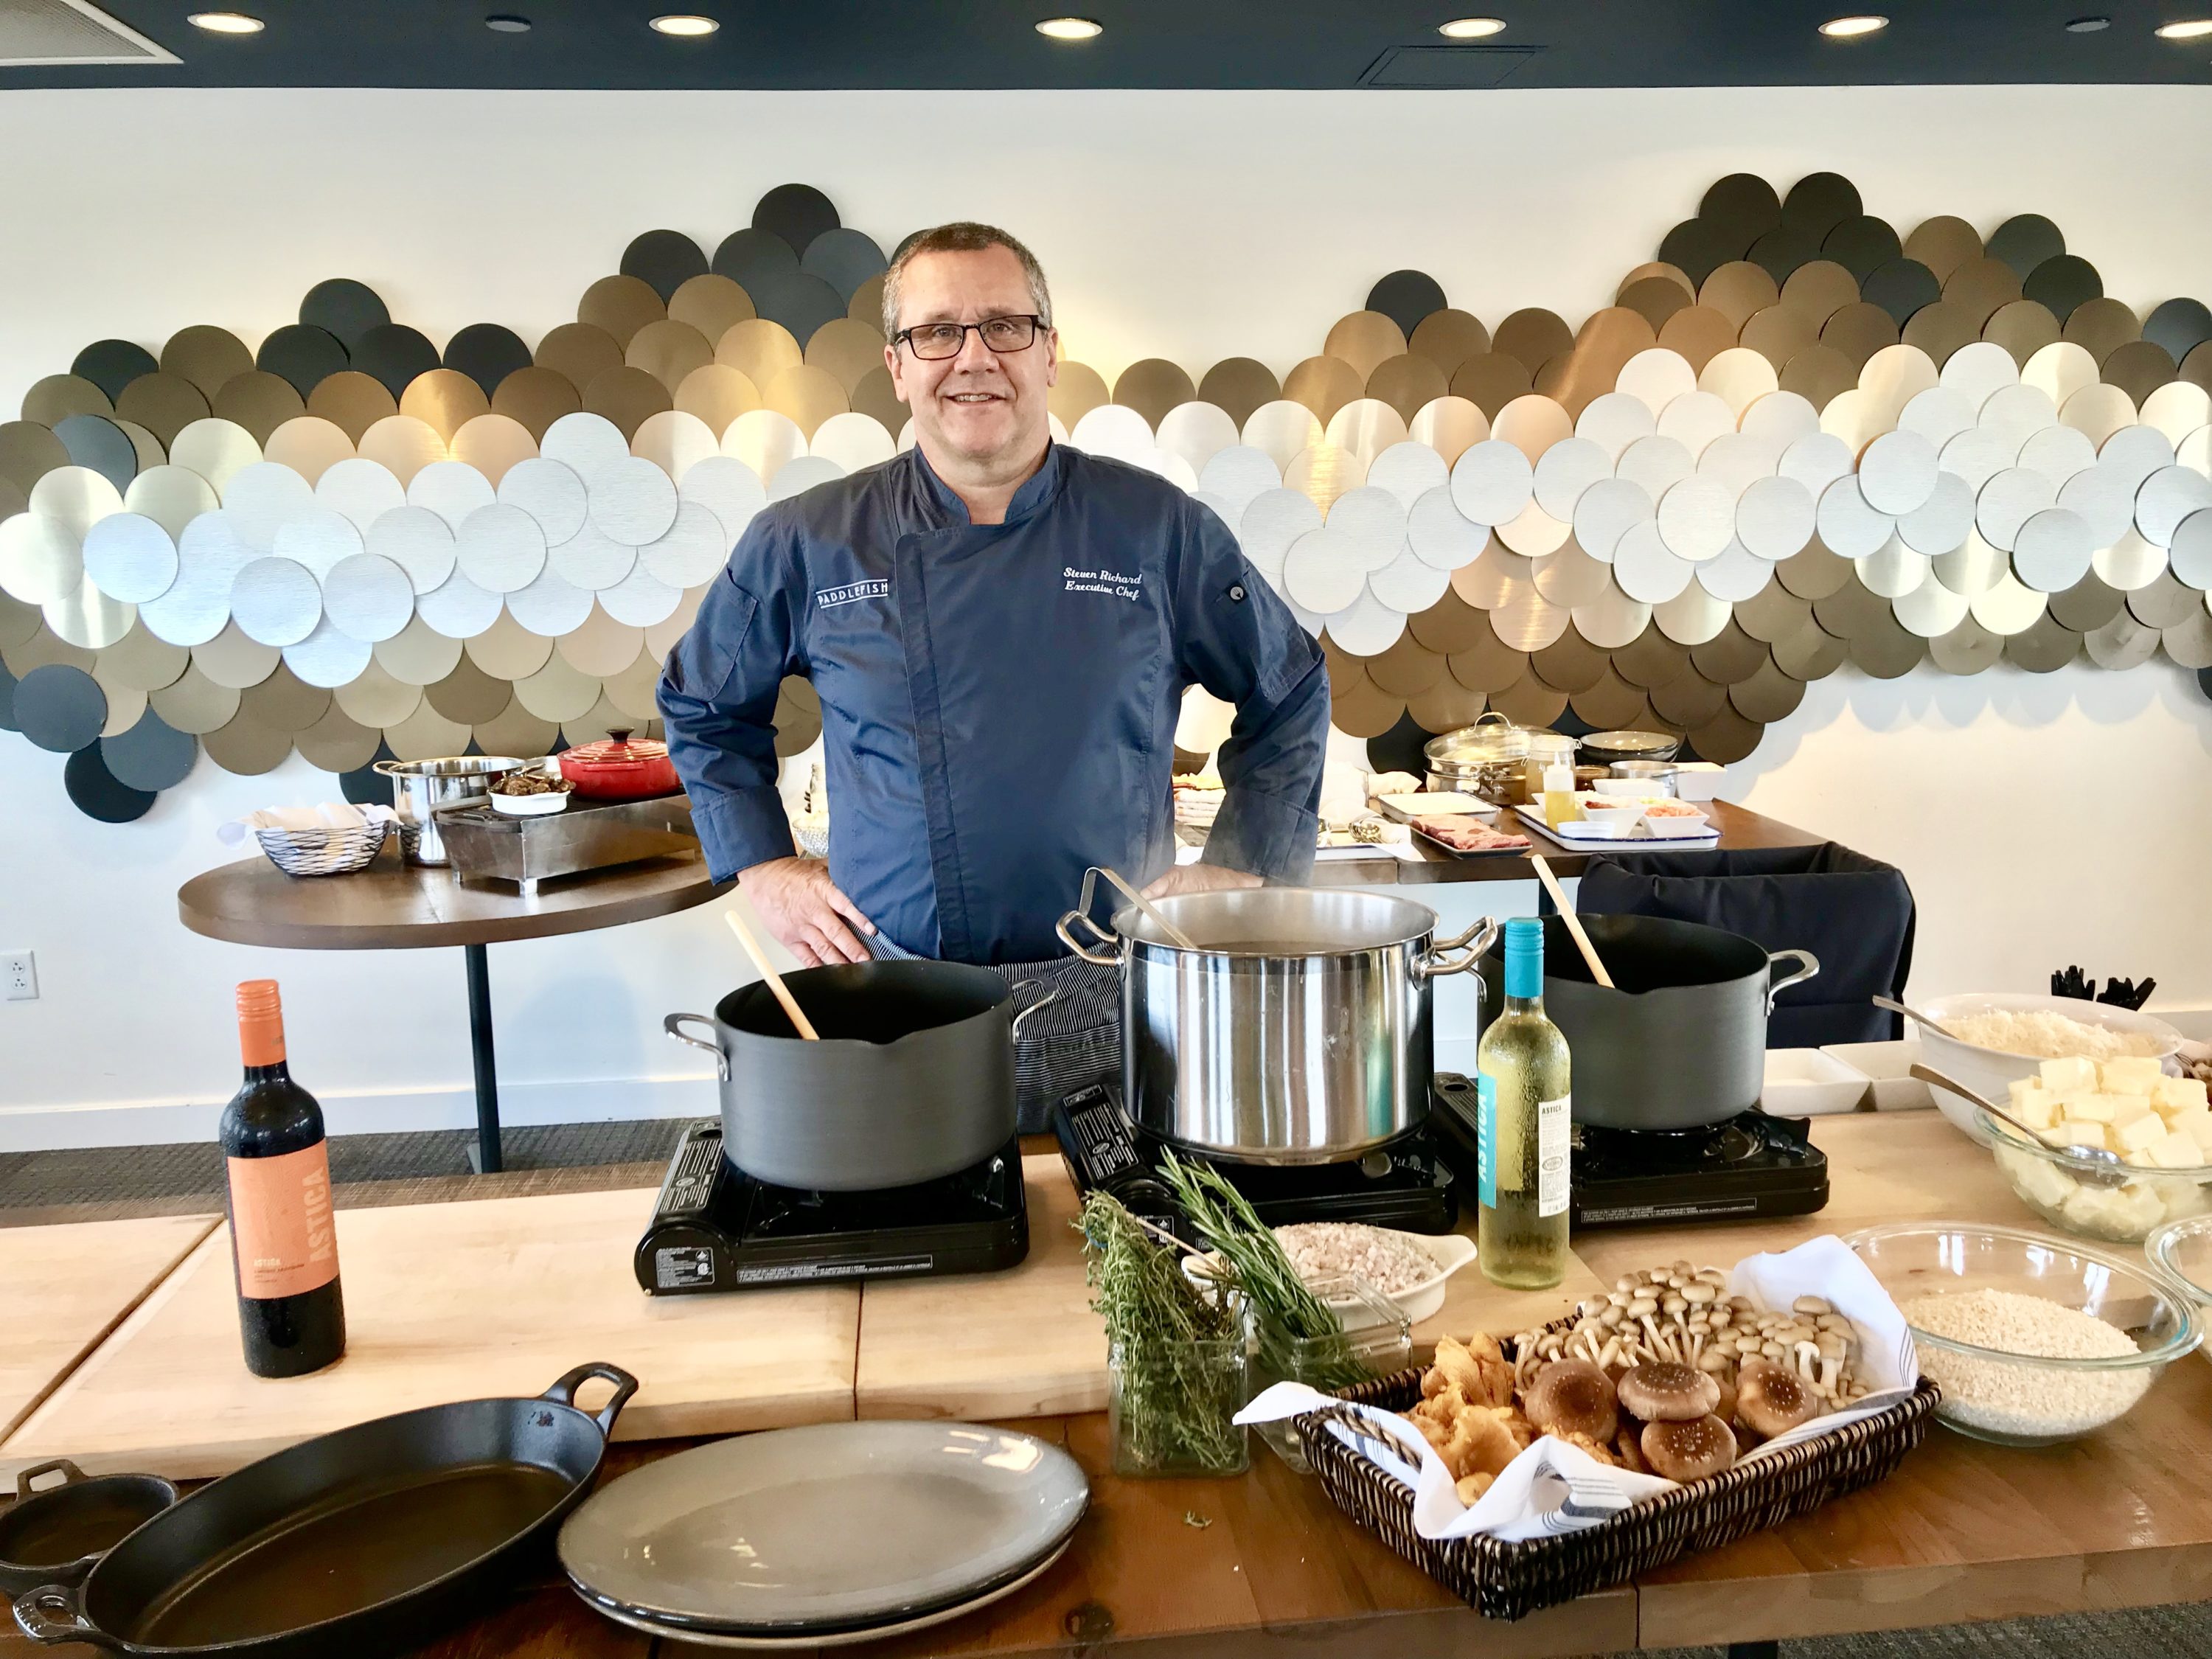 Paddlefish Holiday Cooking Class Hosted by Executive Chef Steve Richard